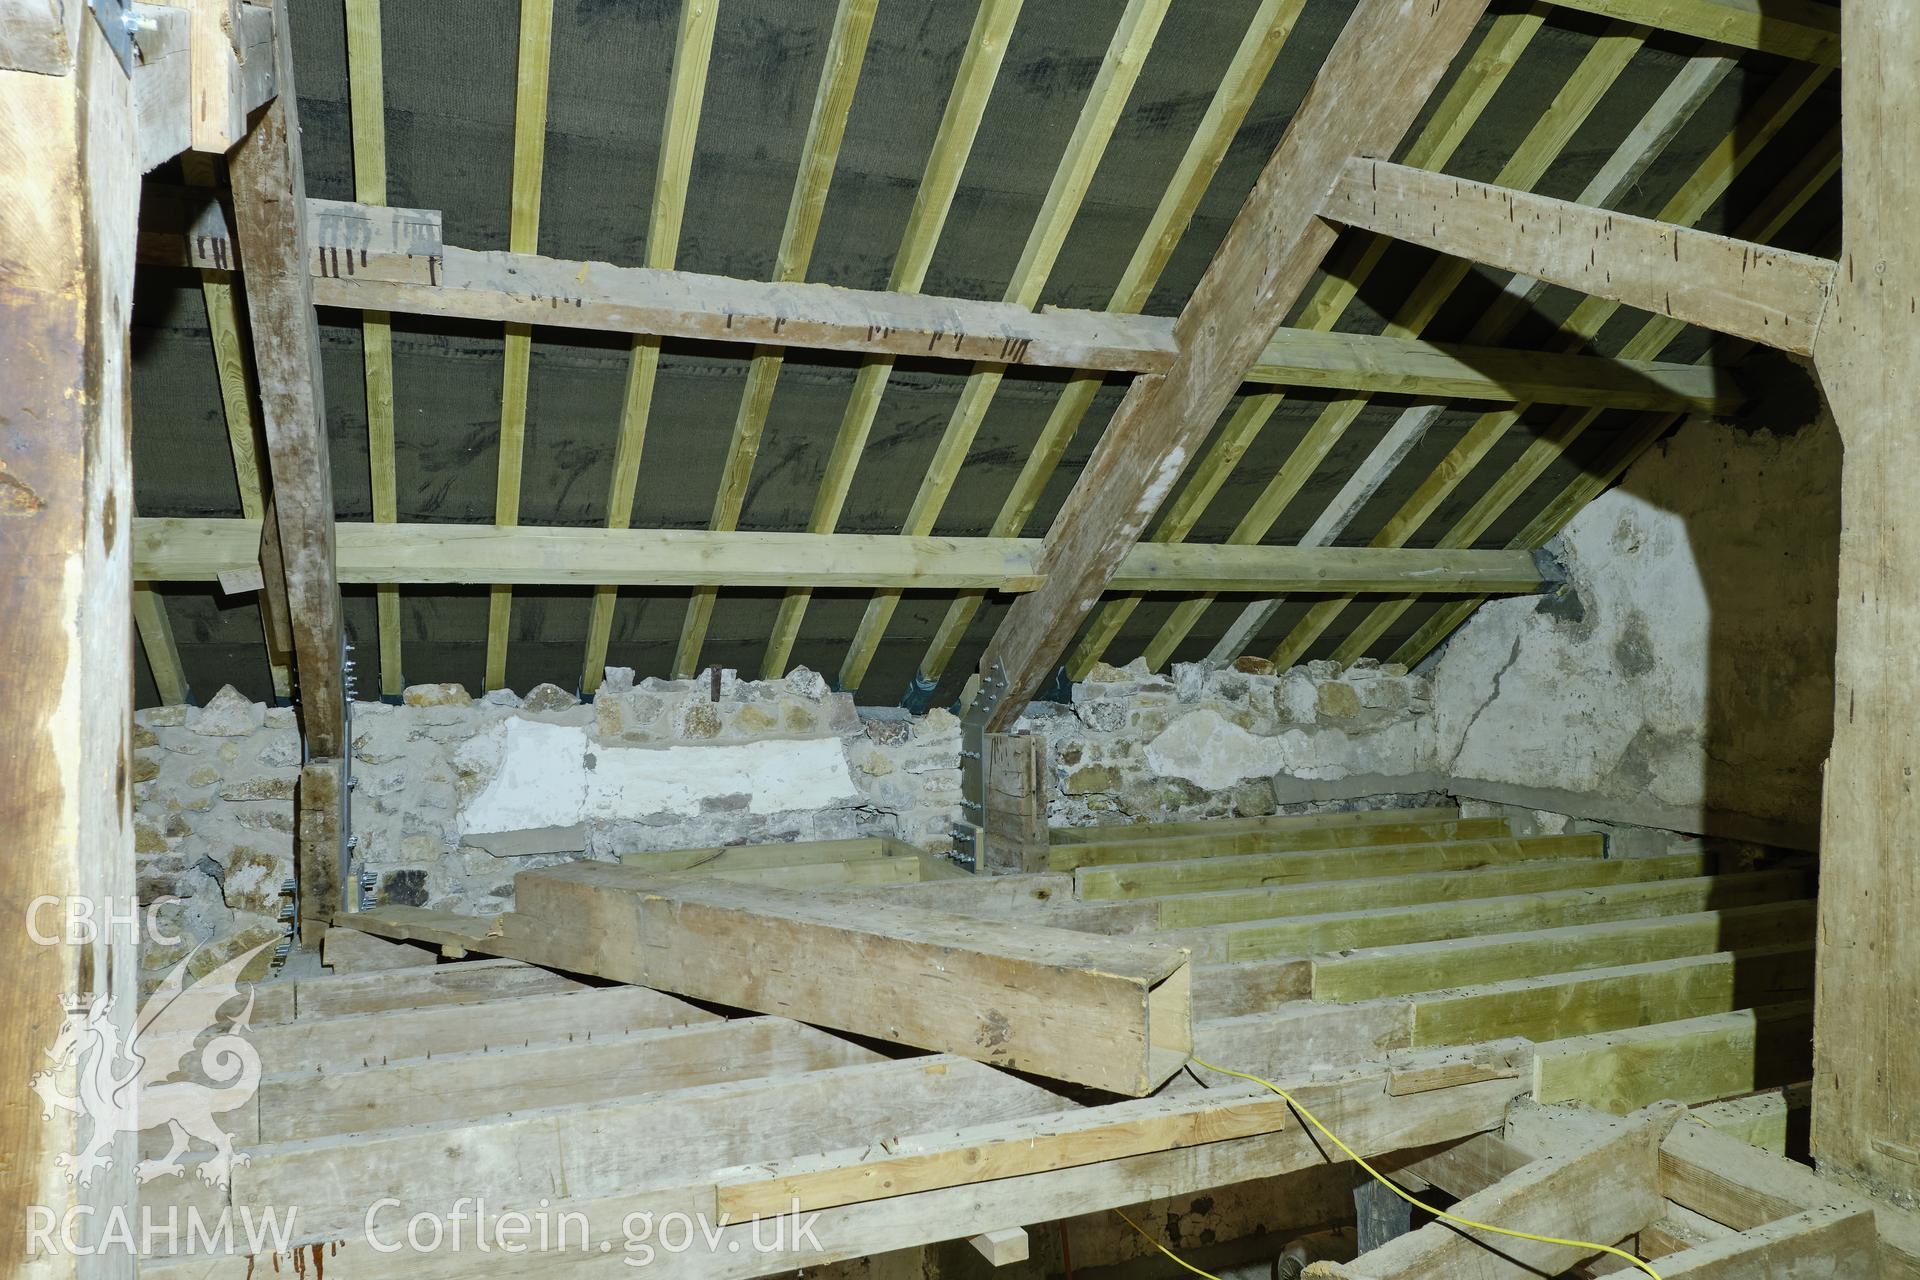 Colour photograph showing Blackpool Mill - attic showing floor joists and principal rafters, looking NE. Produced as part of Historic Building Recording for Blackpool Mill, carried out by Richard Hayman, June 2021.